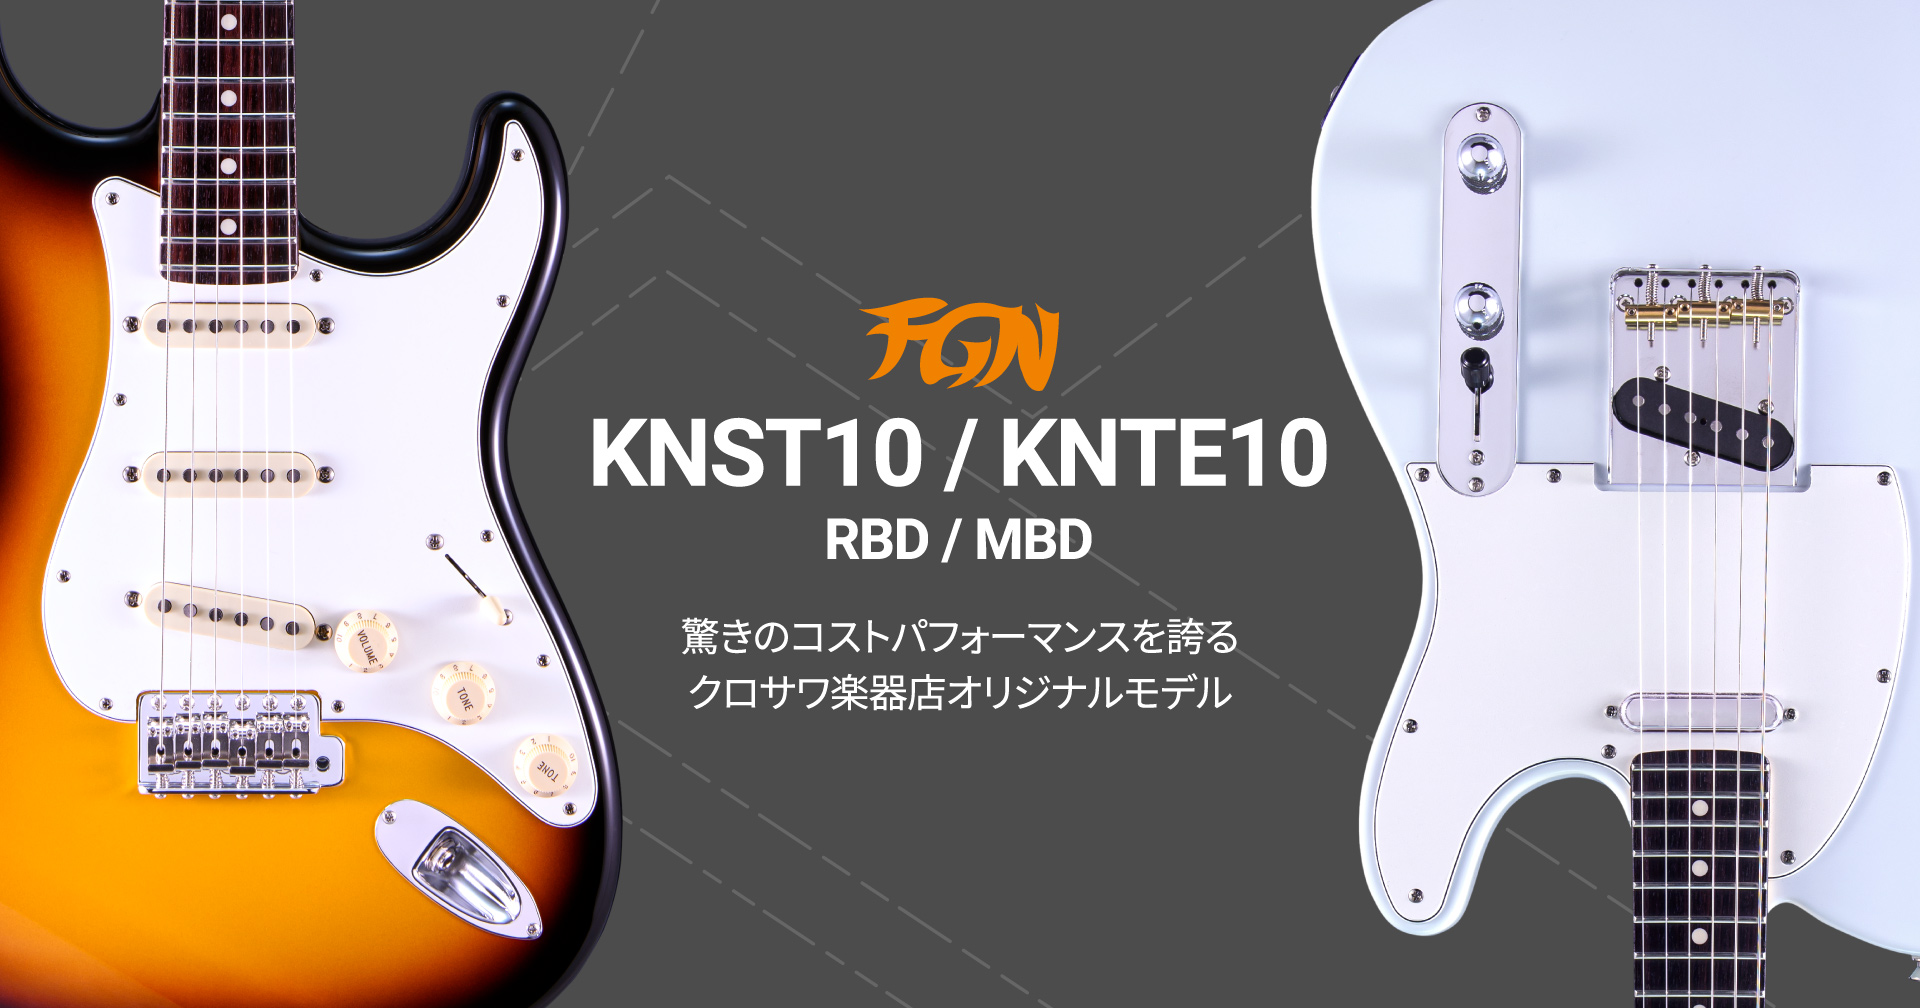 FGN×クロサワ楽器店 KNST10/KNTL10│クロサワ楽器店